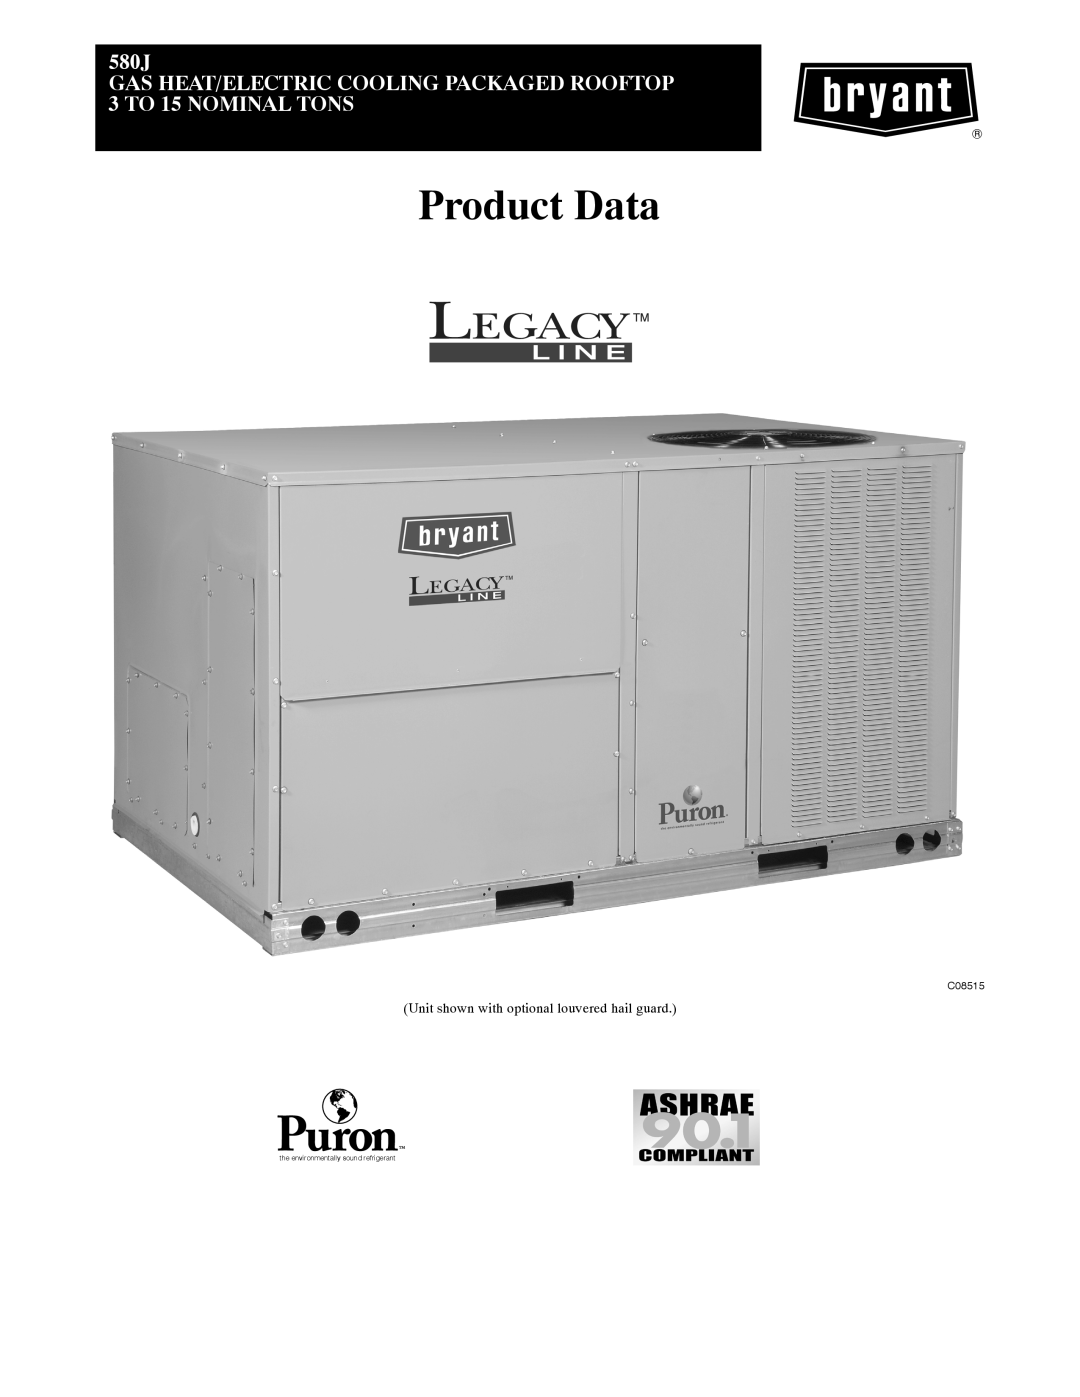 Bryant 580J manual Product Data, Unit shown with optional louvered hail guard, the environmentally sound refrigerant 